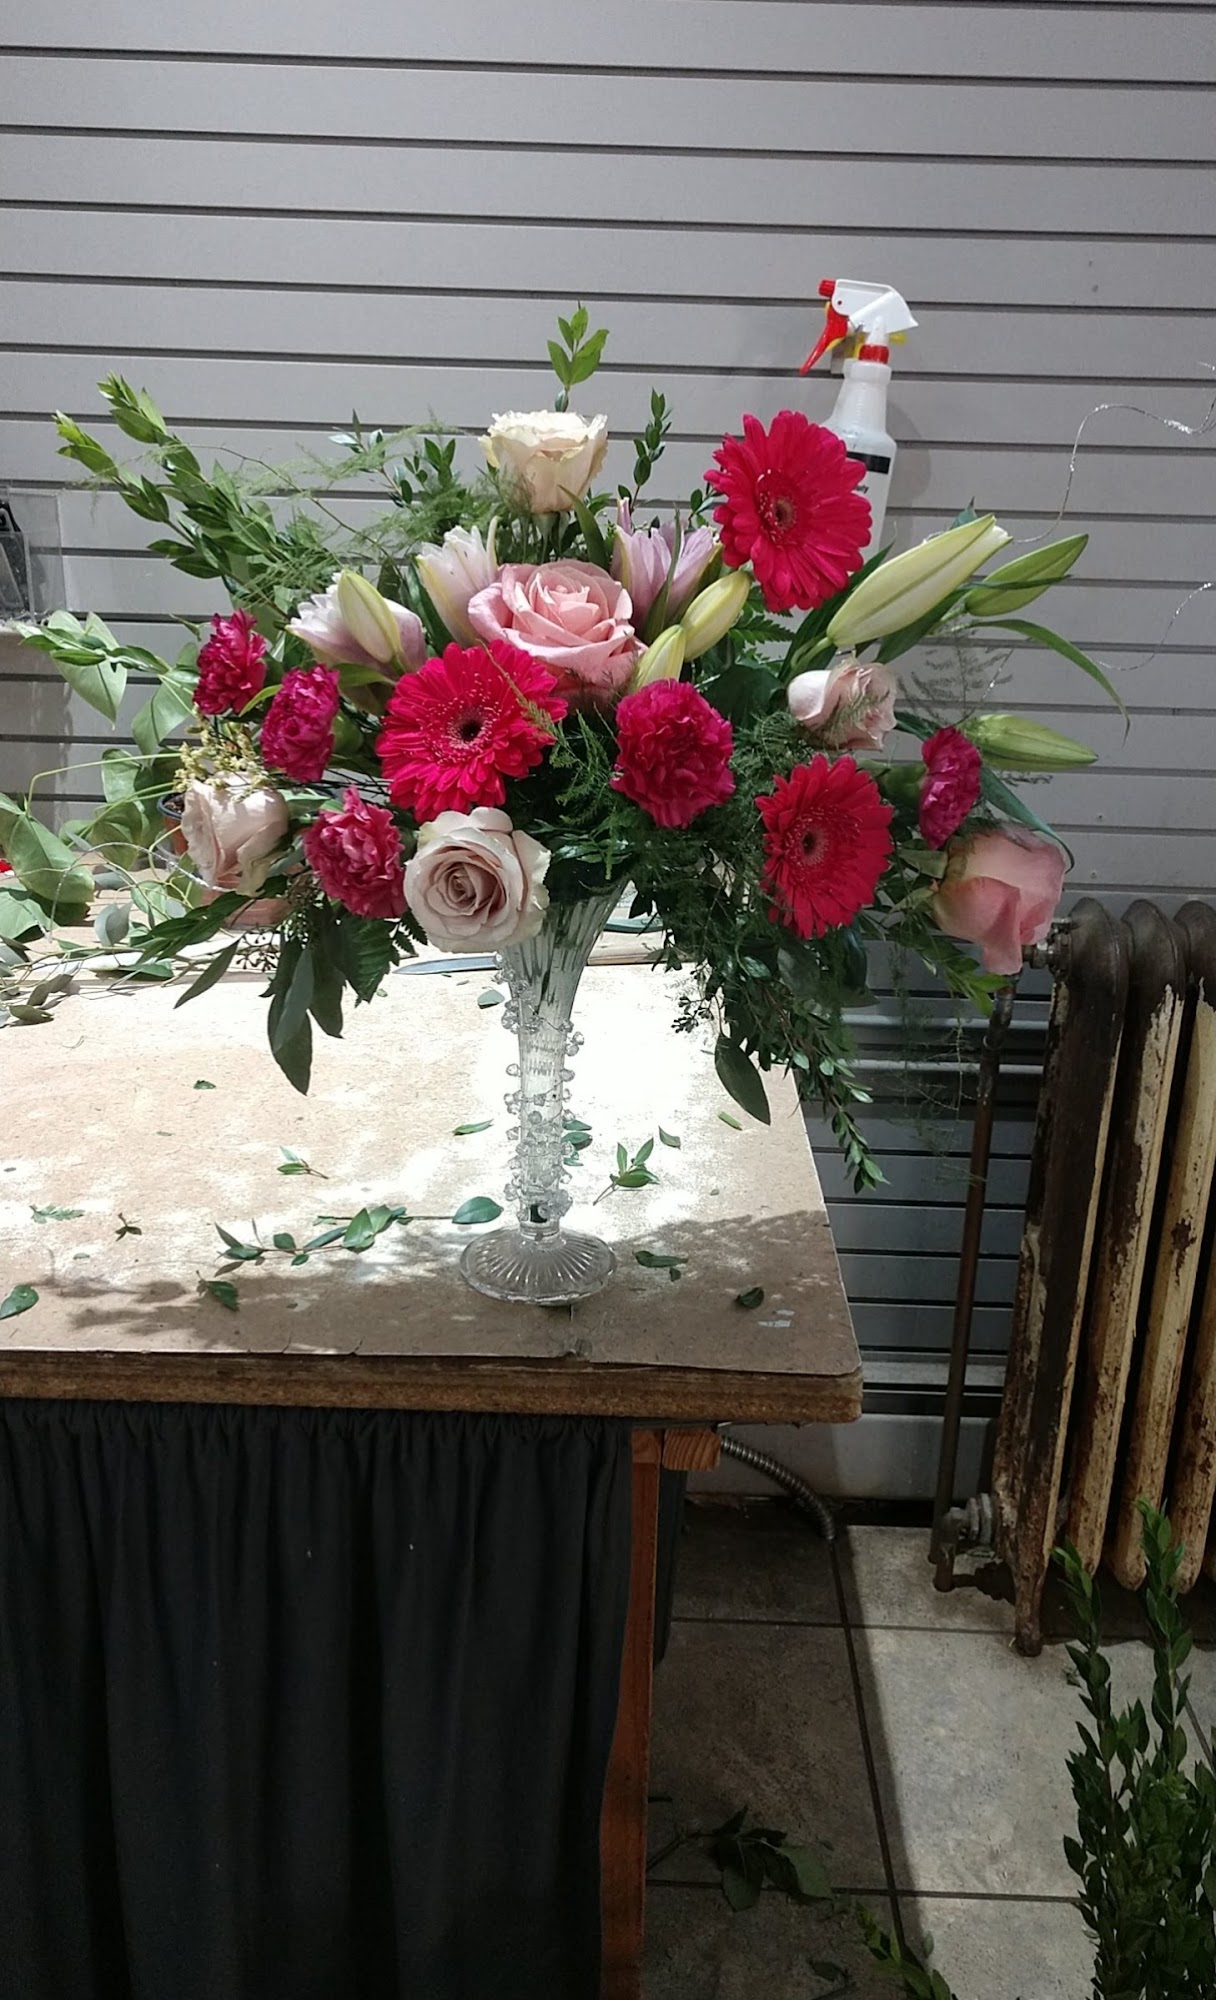 Bloomers Floral & Gift 501 E Sheridan St, Ely Minnesota 55731